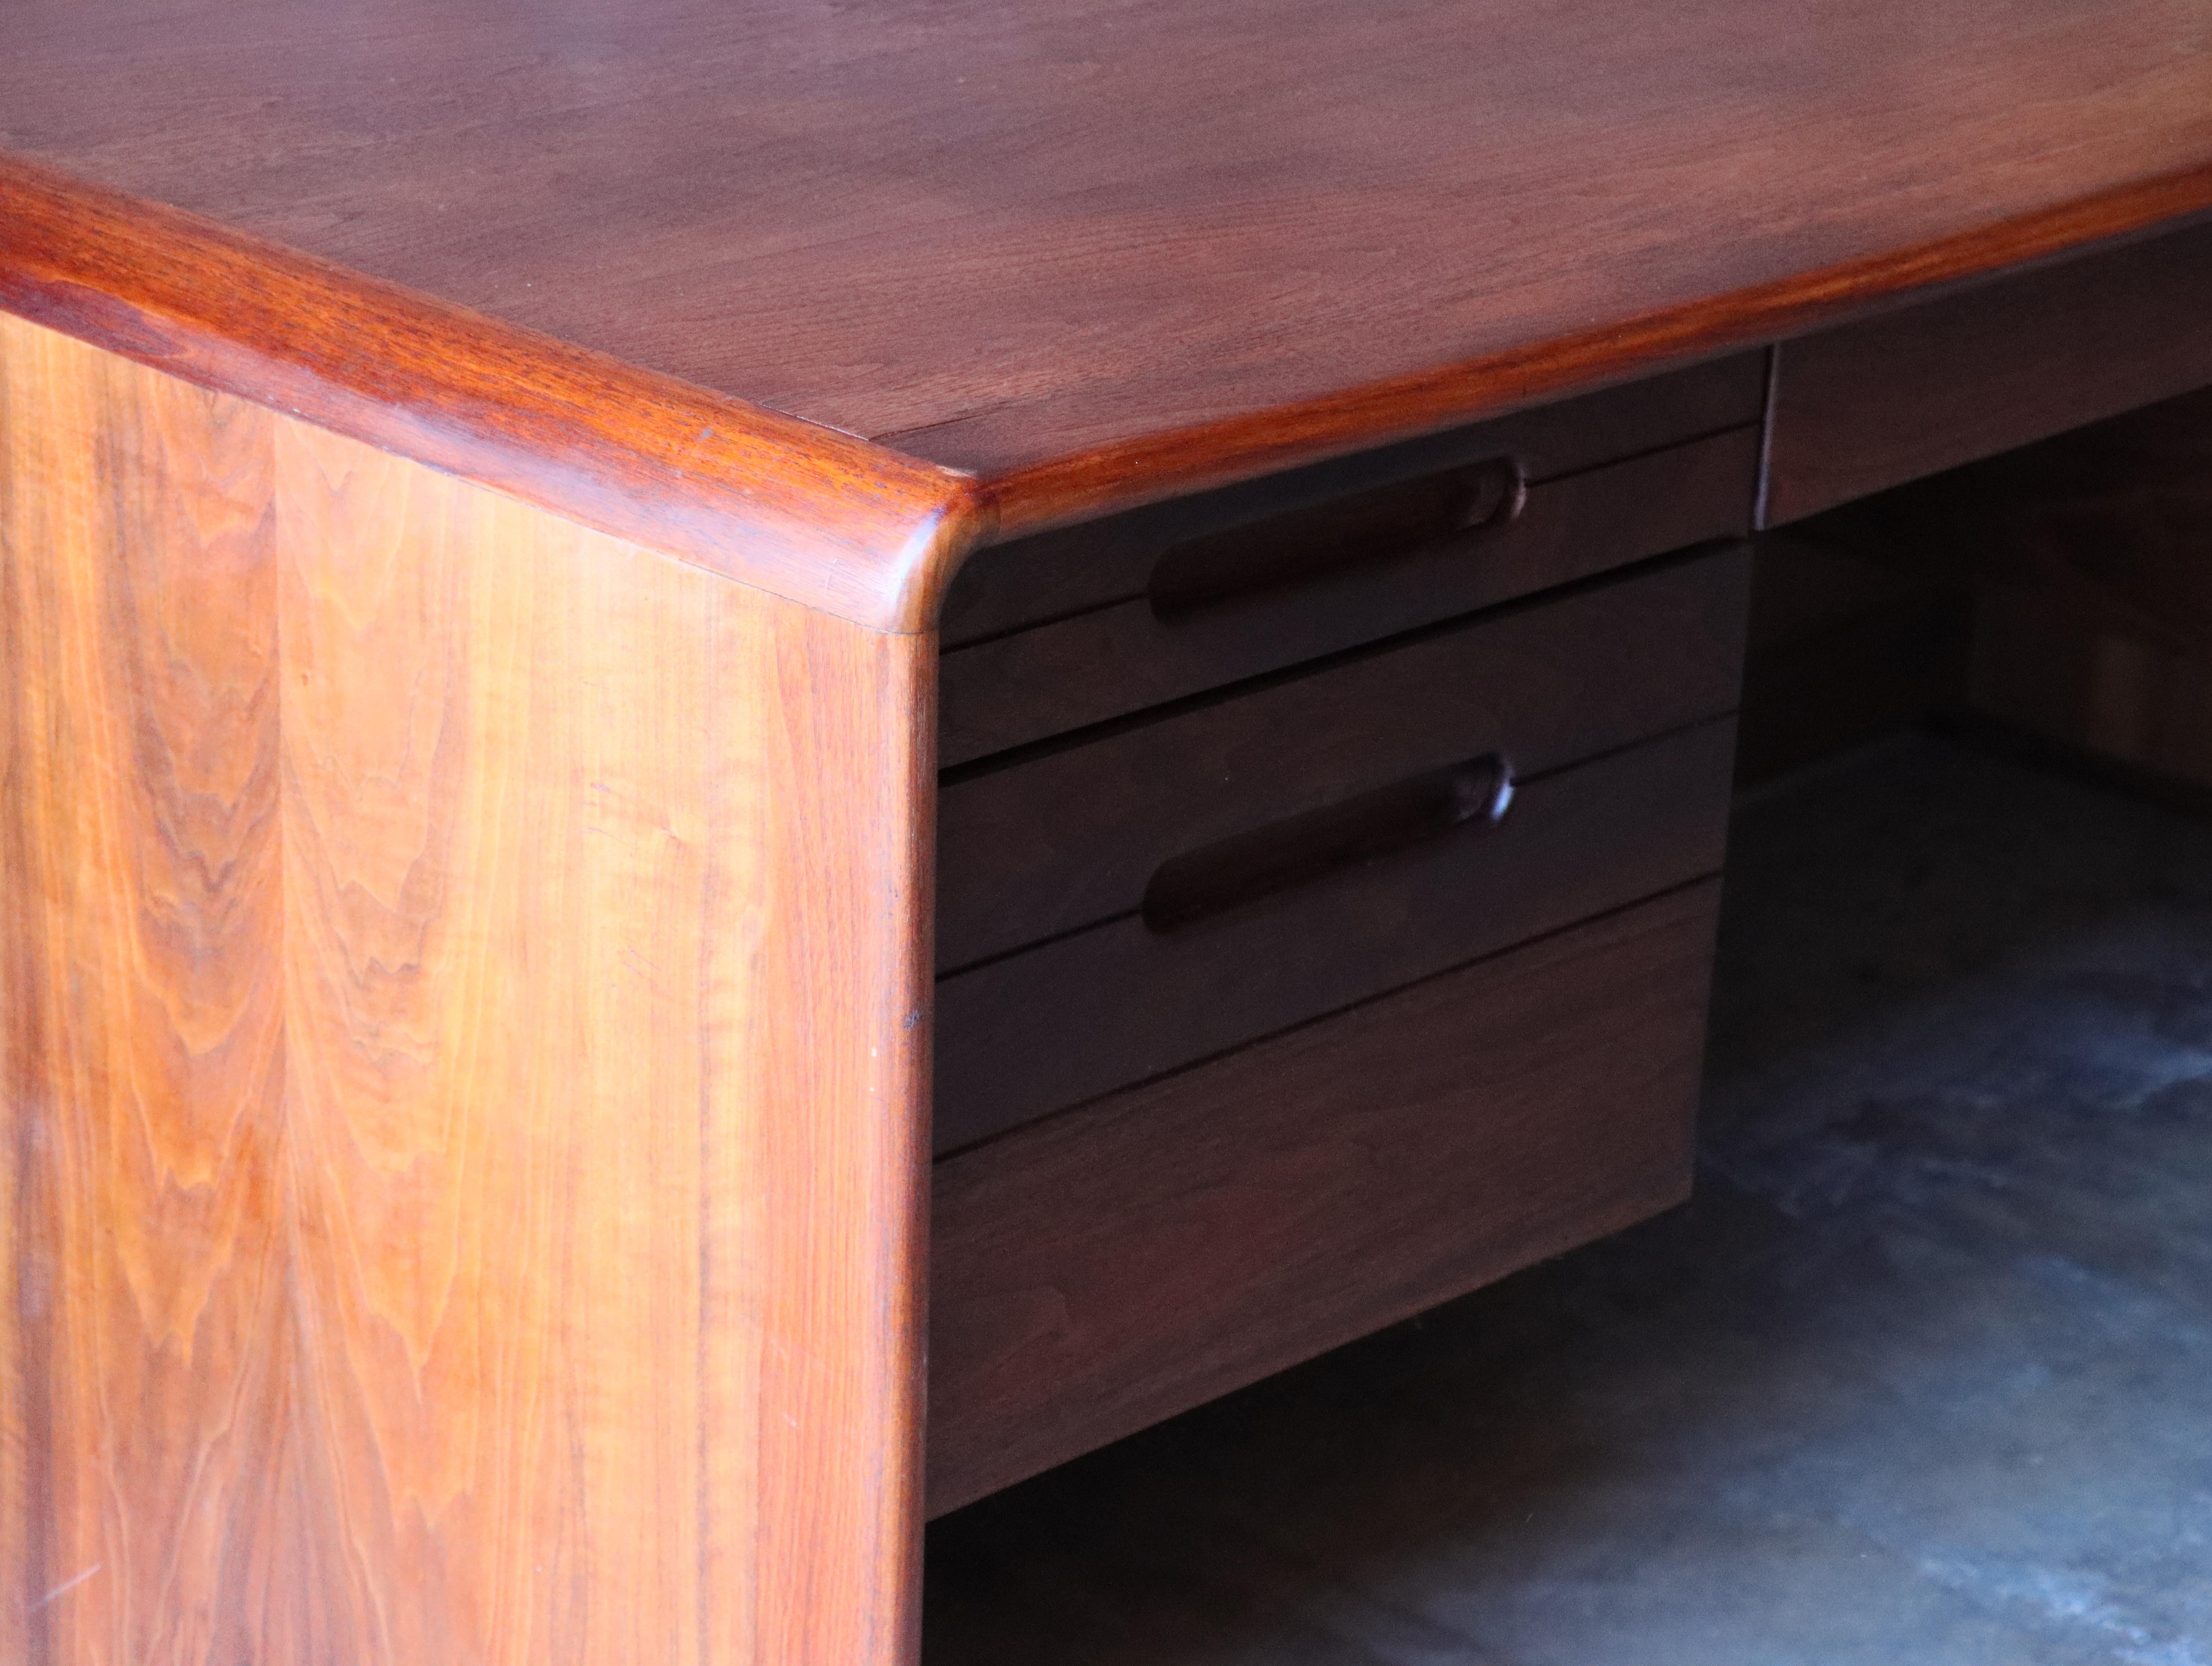 Solid Walnut and Burlwood Desk by Lou Hodges, California Design, 1970s For Sale 4